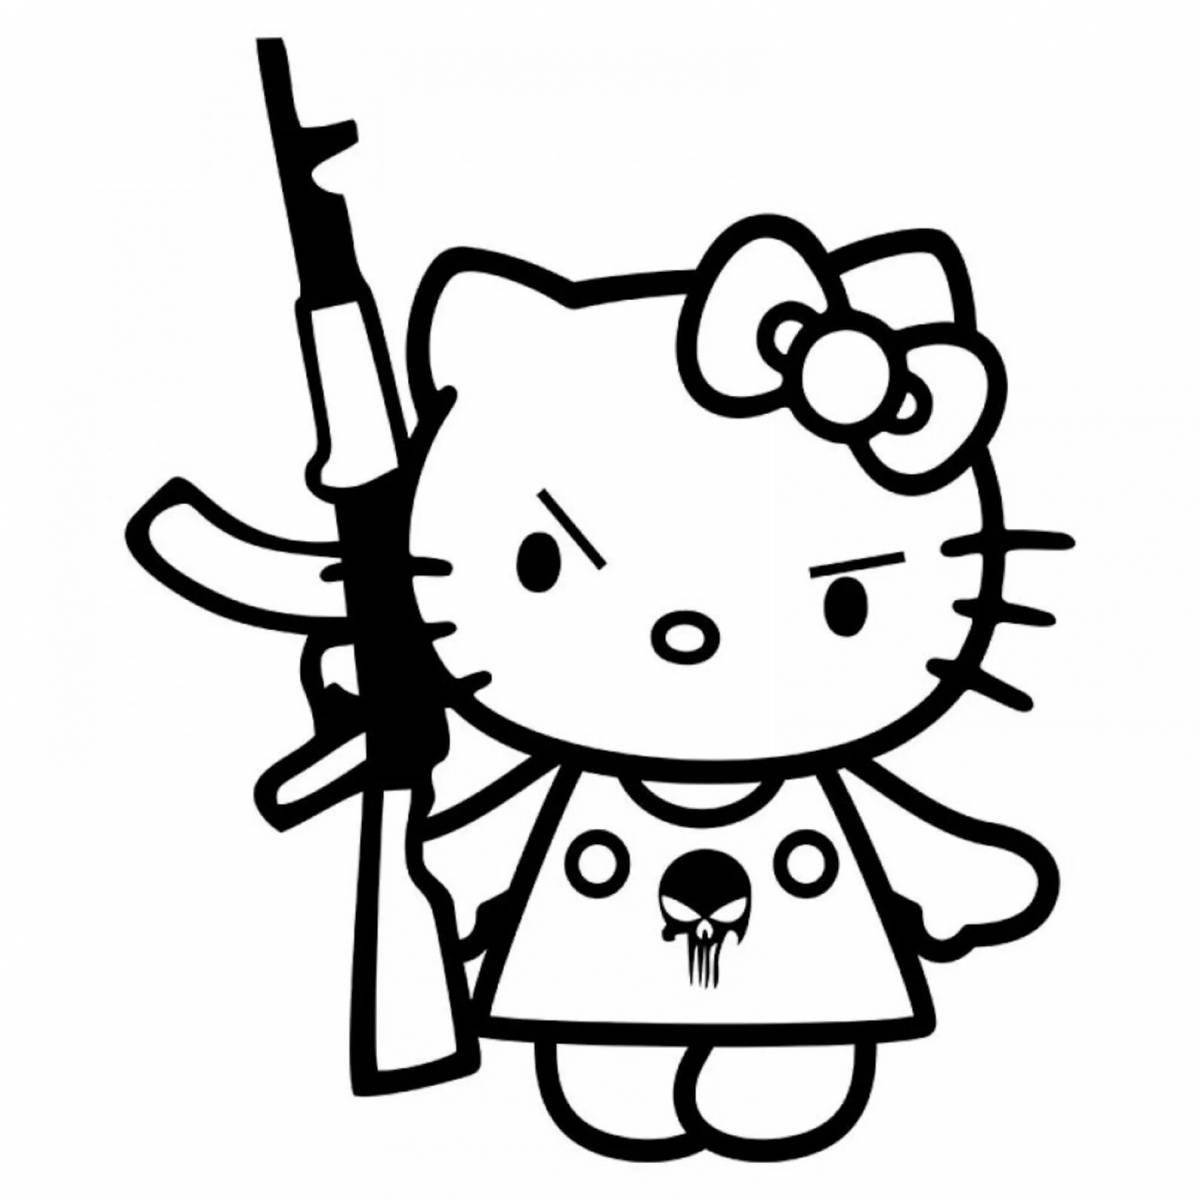 Attracting hello kitty with a gun